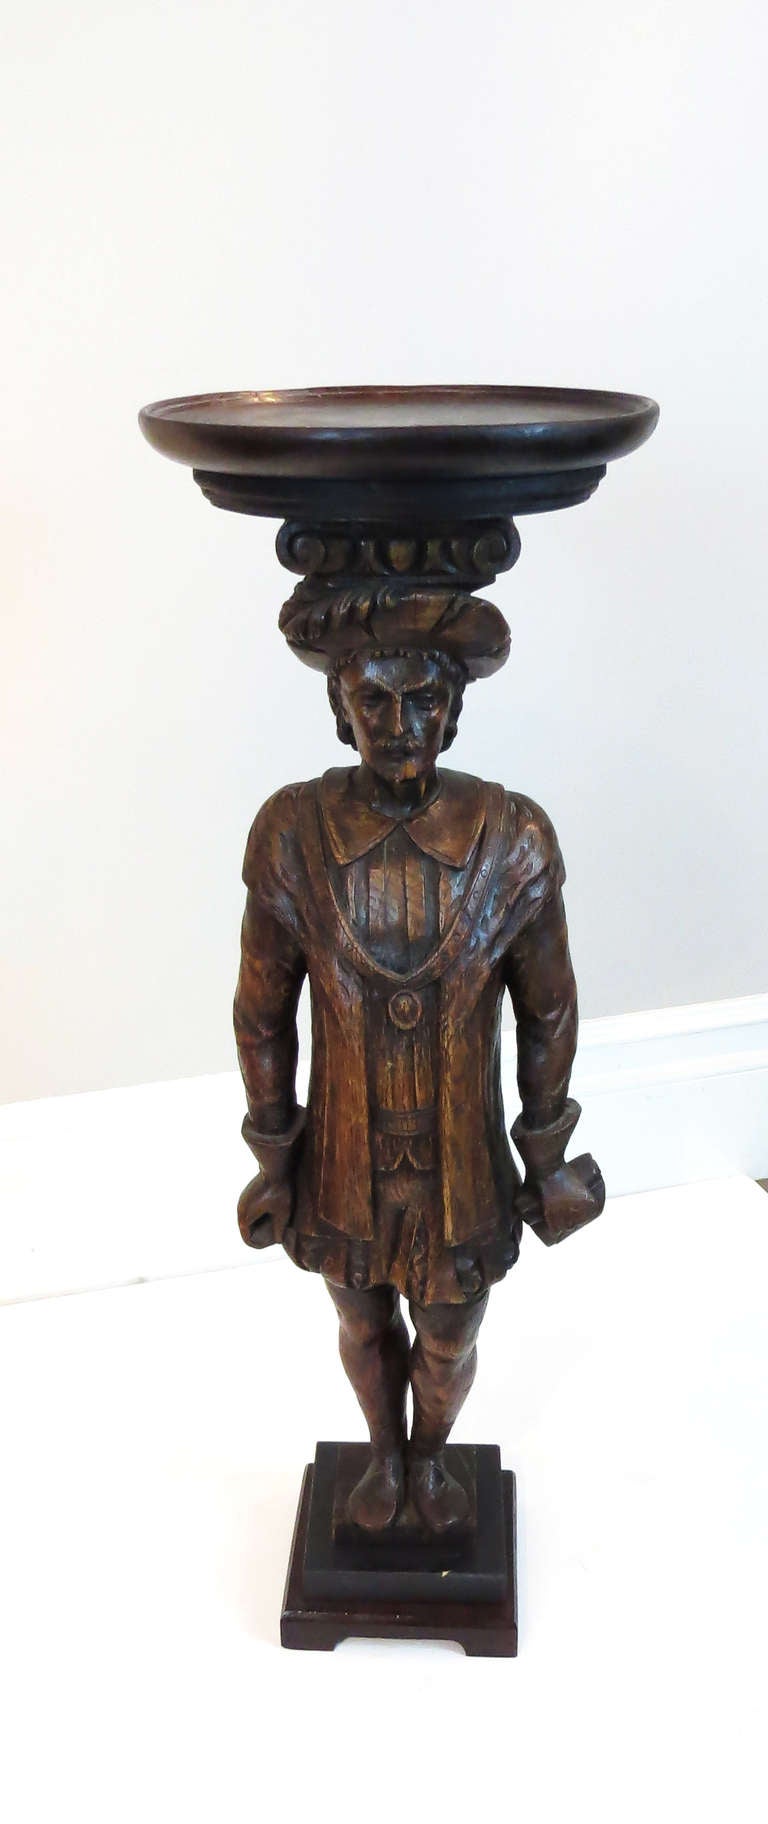 Very interesting hand-carved statue with pedestal top. The entire piece is made of carved wood with a dark finish.